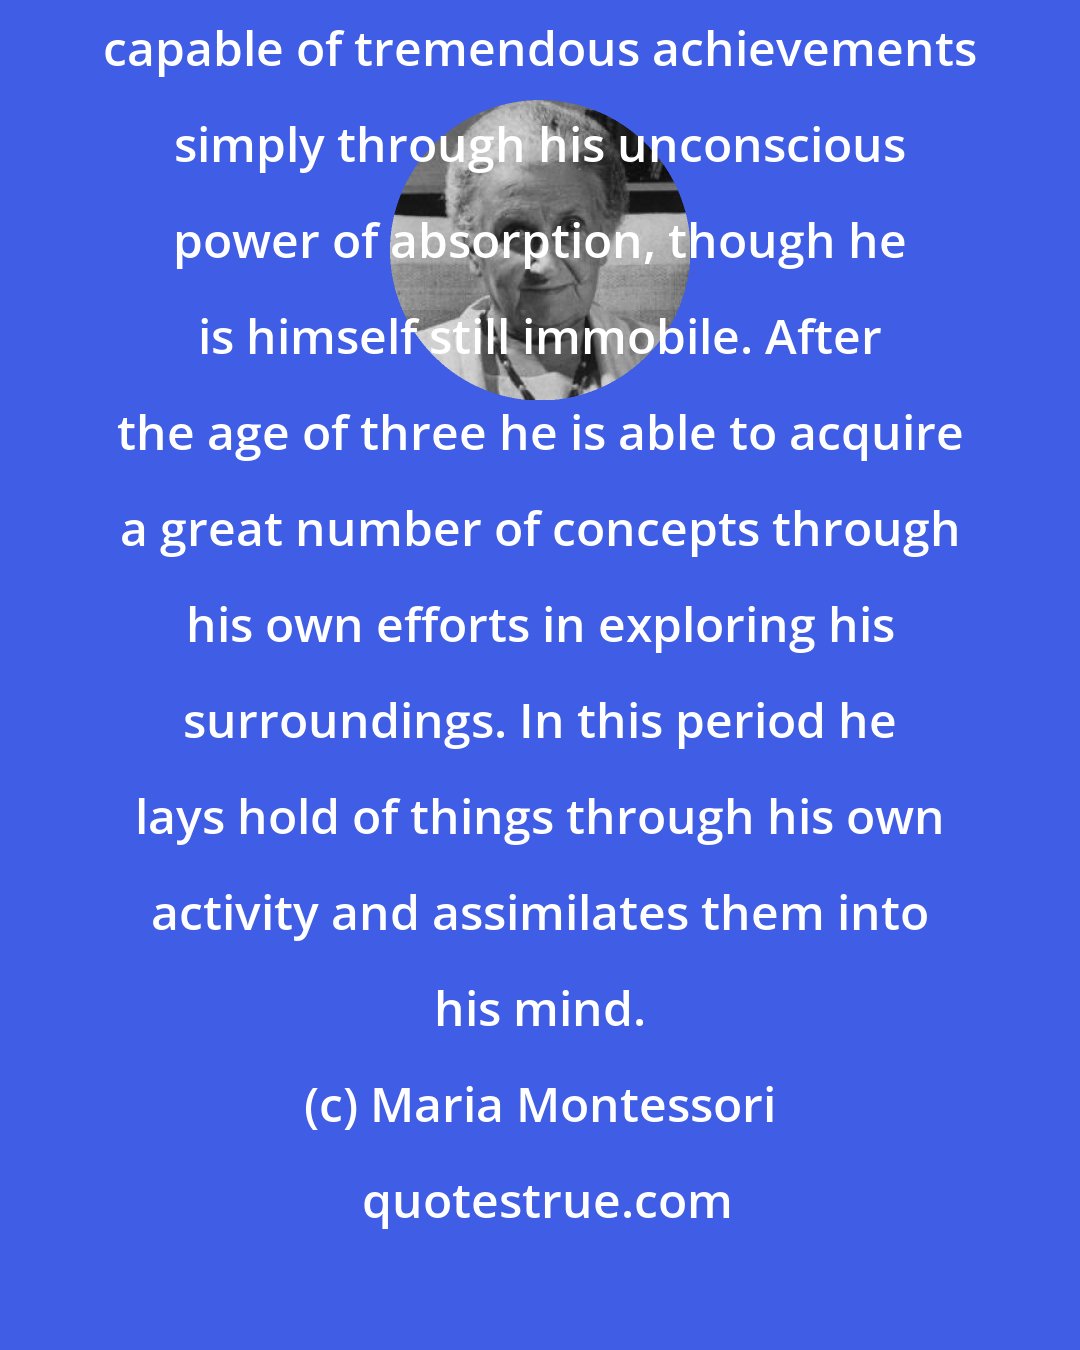 Maria Montessori: A child in his earliest years, when he is only two or a little more, is capable of tremendous achievements simply through his unconscious power of absorption, though he is himself still immobile. After the age of three he is able to acquire a great number of concepts through his own efforts in exploring his surroundings. In this period he lays hold of things through his own activity and assimilates them into his mind.